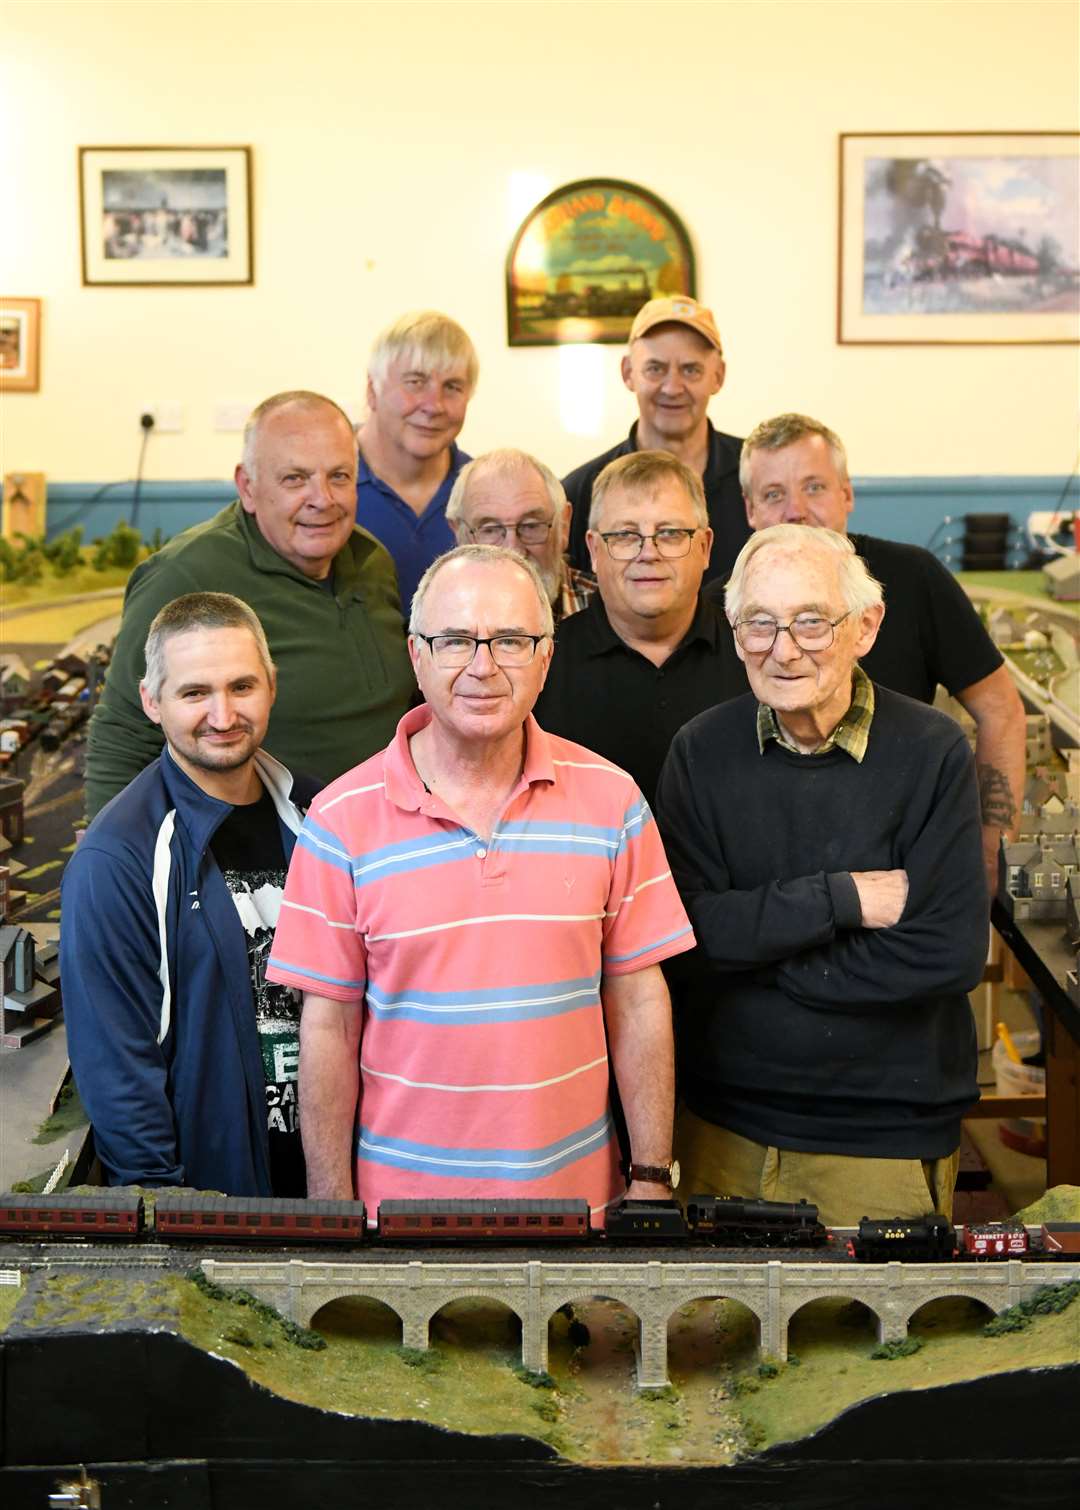 From front to back: Gordon Smith, Brian Marshall, Frank Martin, Richard Parris, Jack Paterson, John Featch, Matt Jenkins, Graeme Swanson and George Taylor. Picture: James Mackenzie.